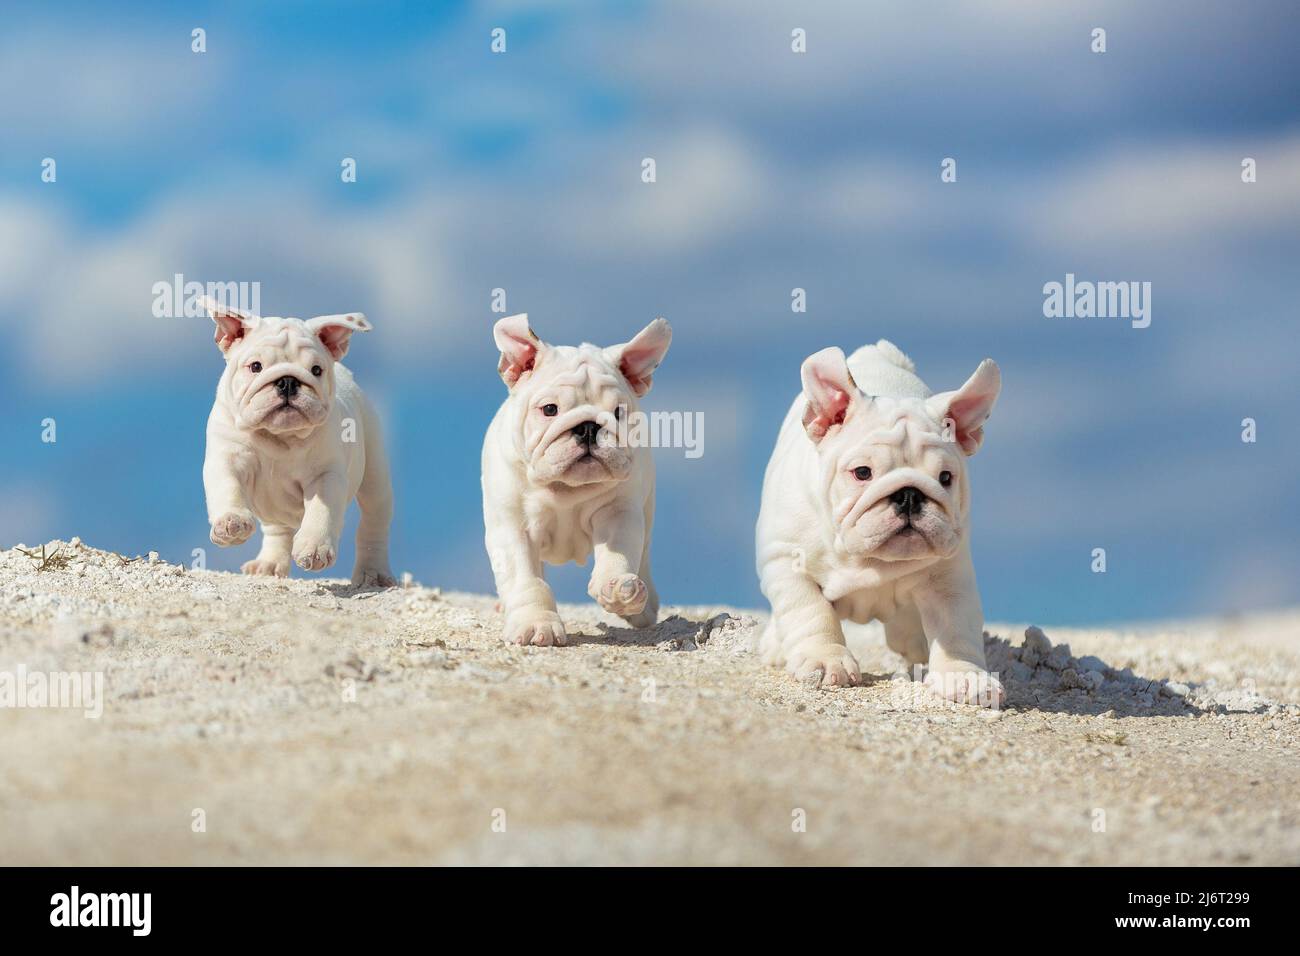 Gorgeous white English Bulldog puppies running towards the toy against a bright blue sky Stock Photo